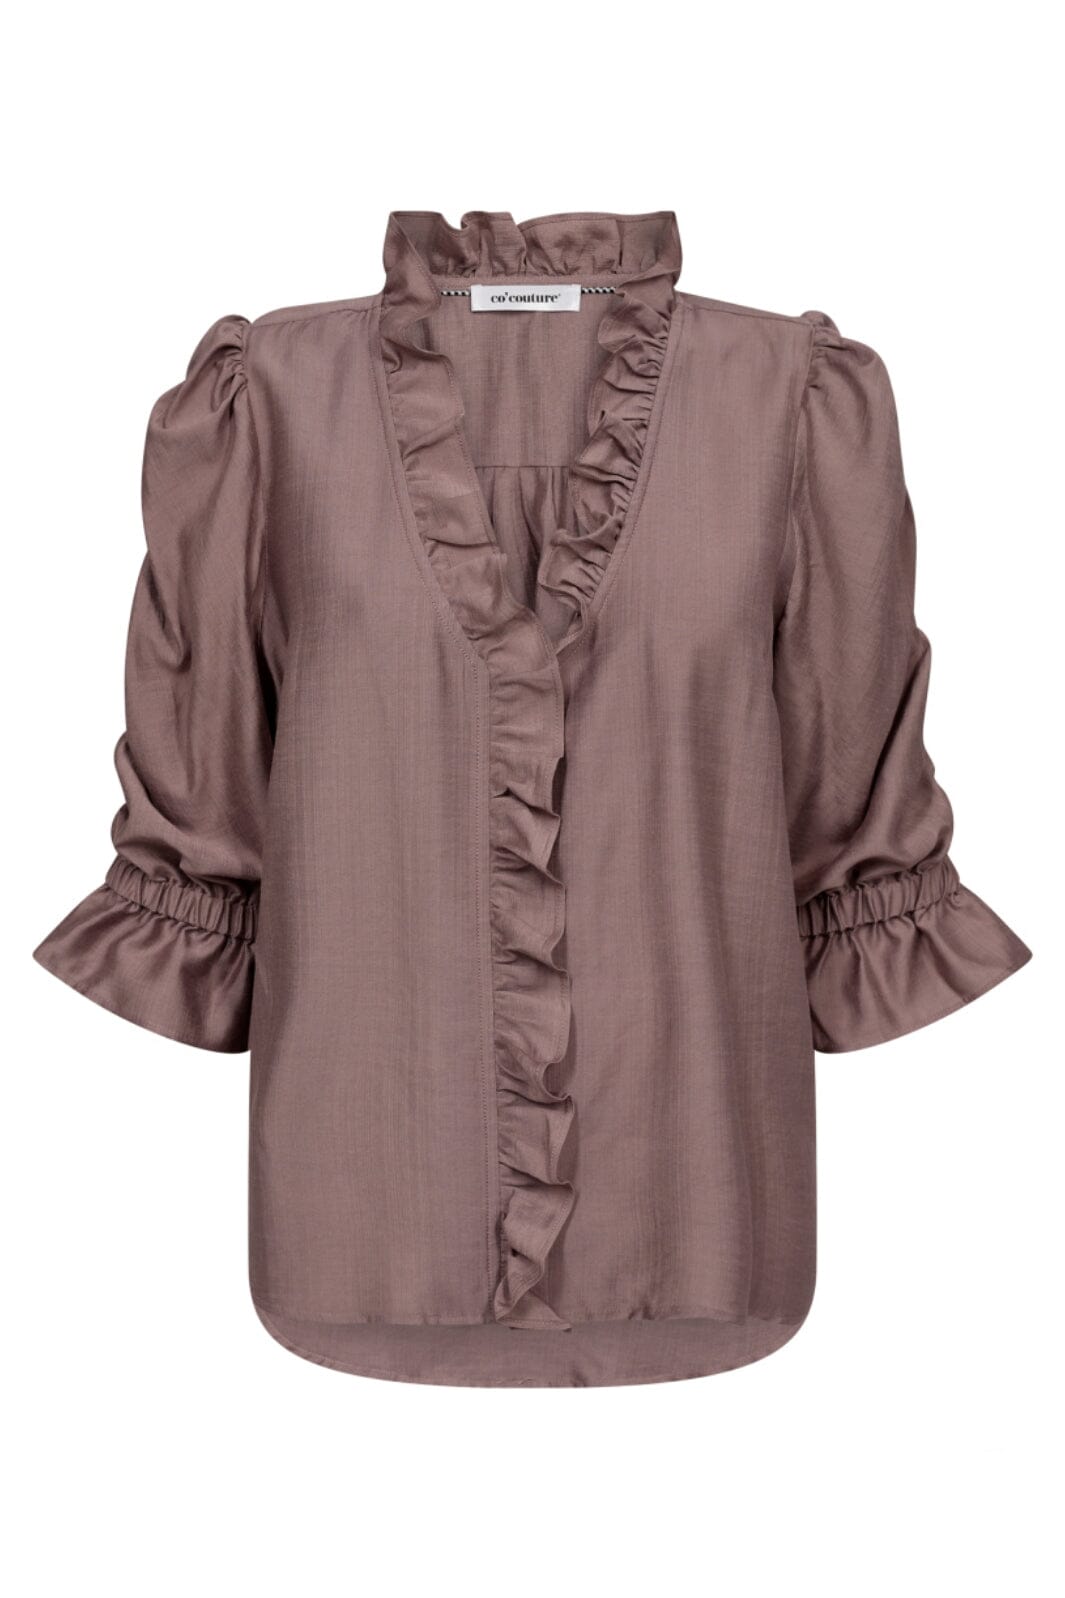 Co´couture - Heracc Frill Ss Blouse 35535 - 124 Dusty Rose Skjorter 